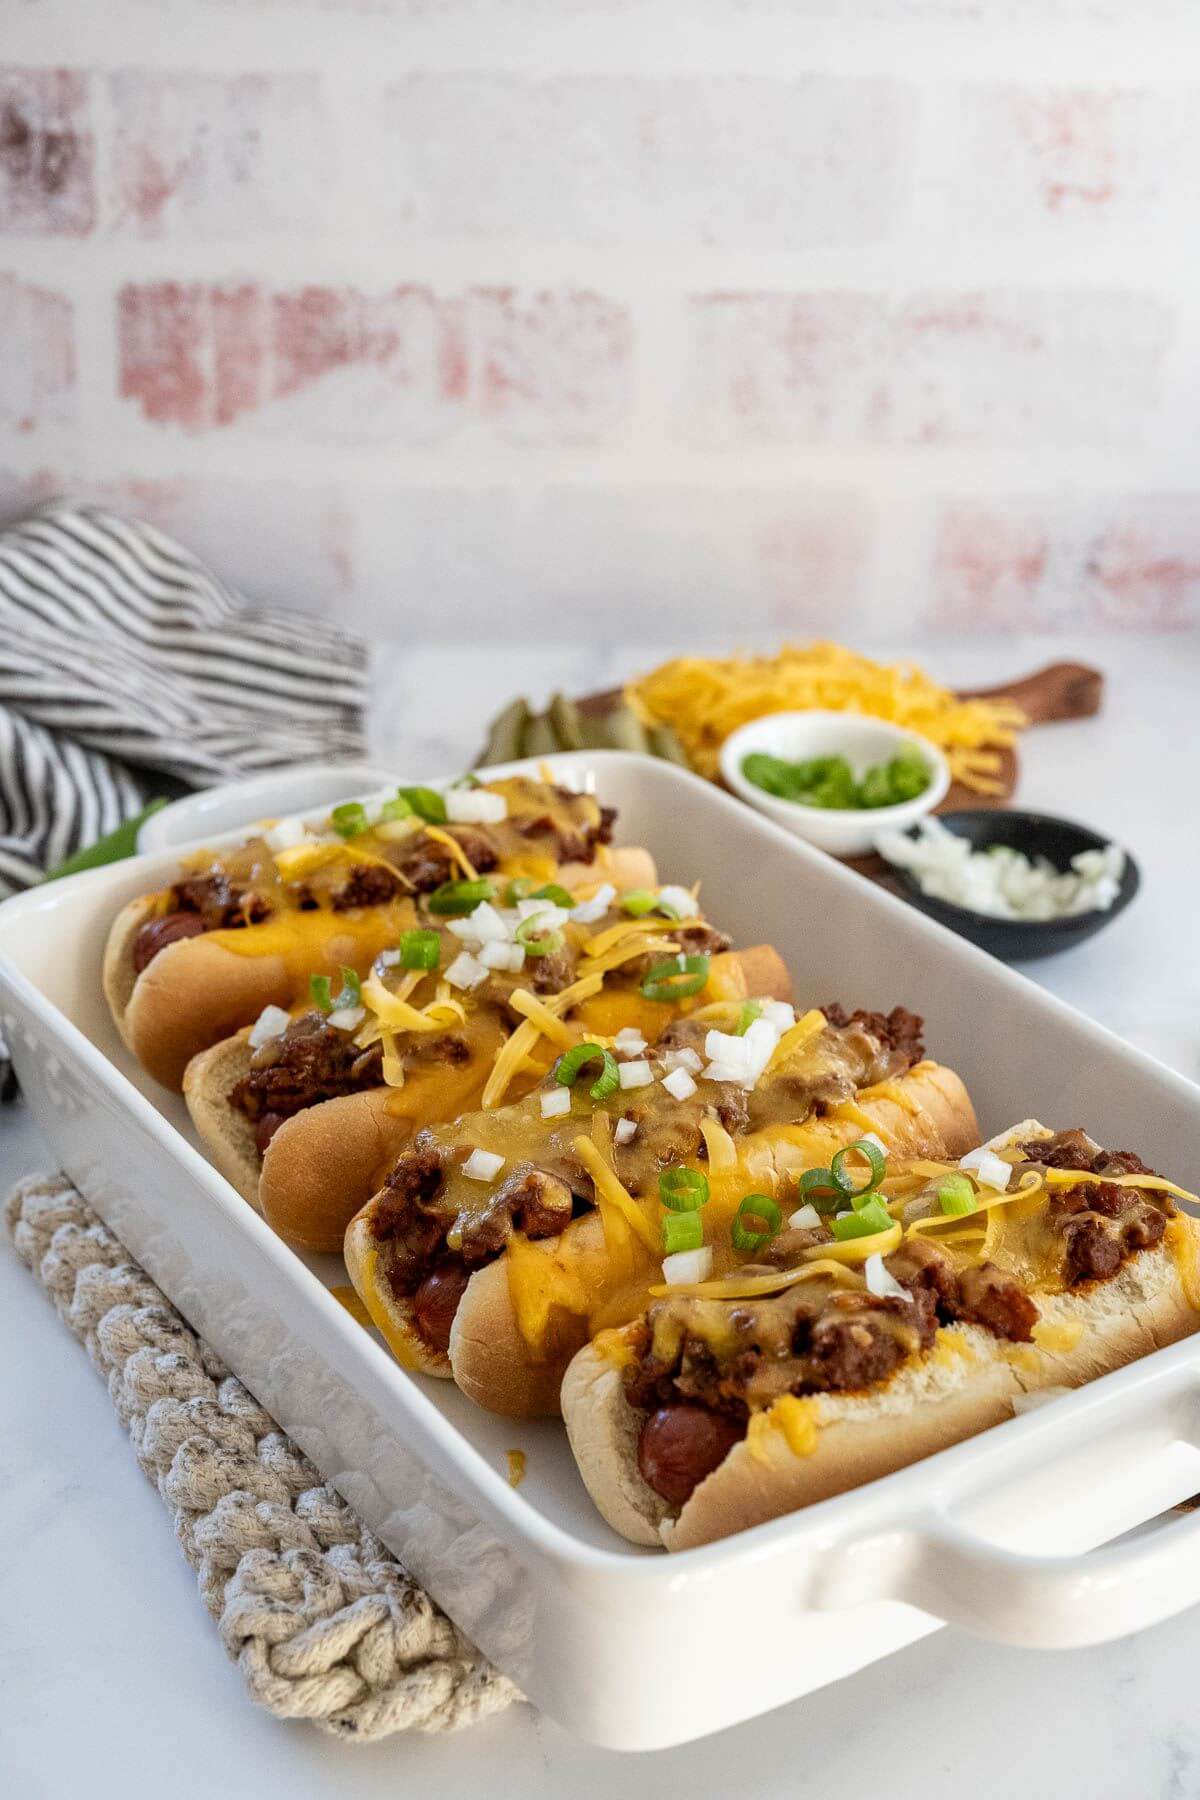 Small bowls of extra toppings are next to the big baking dish filled with cooked chili dogs.